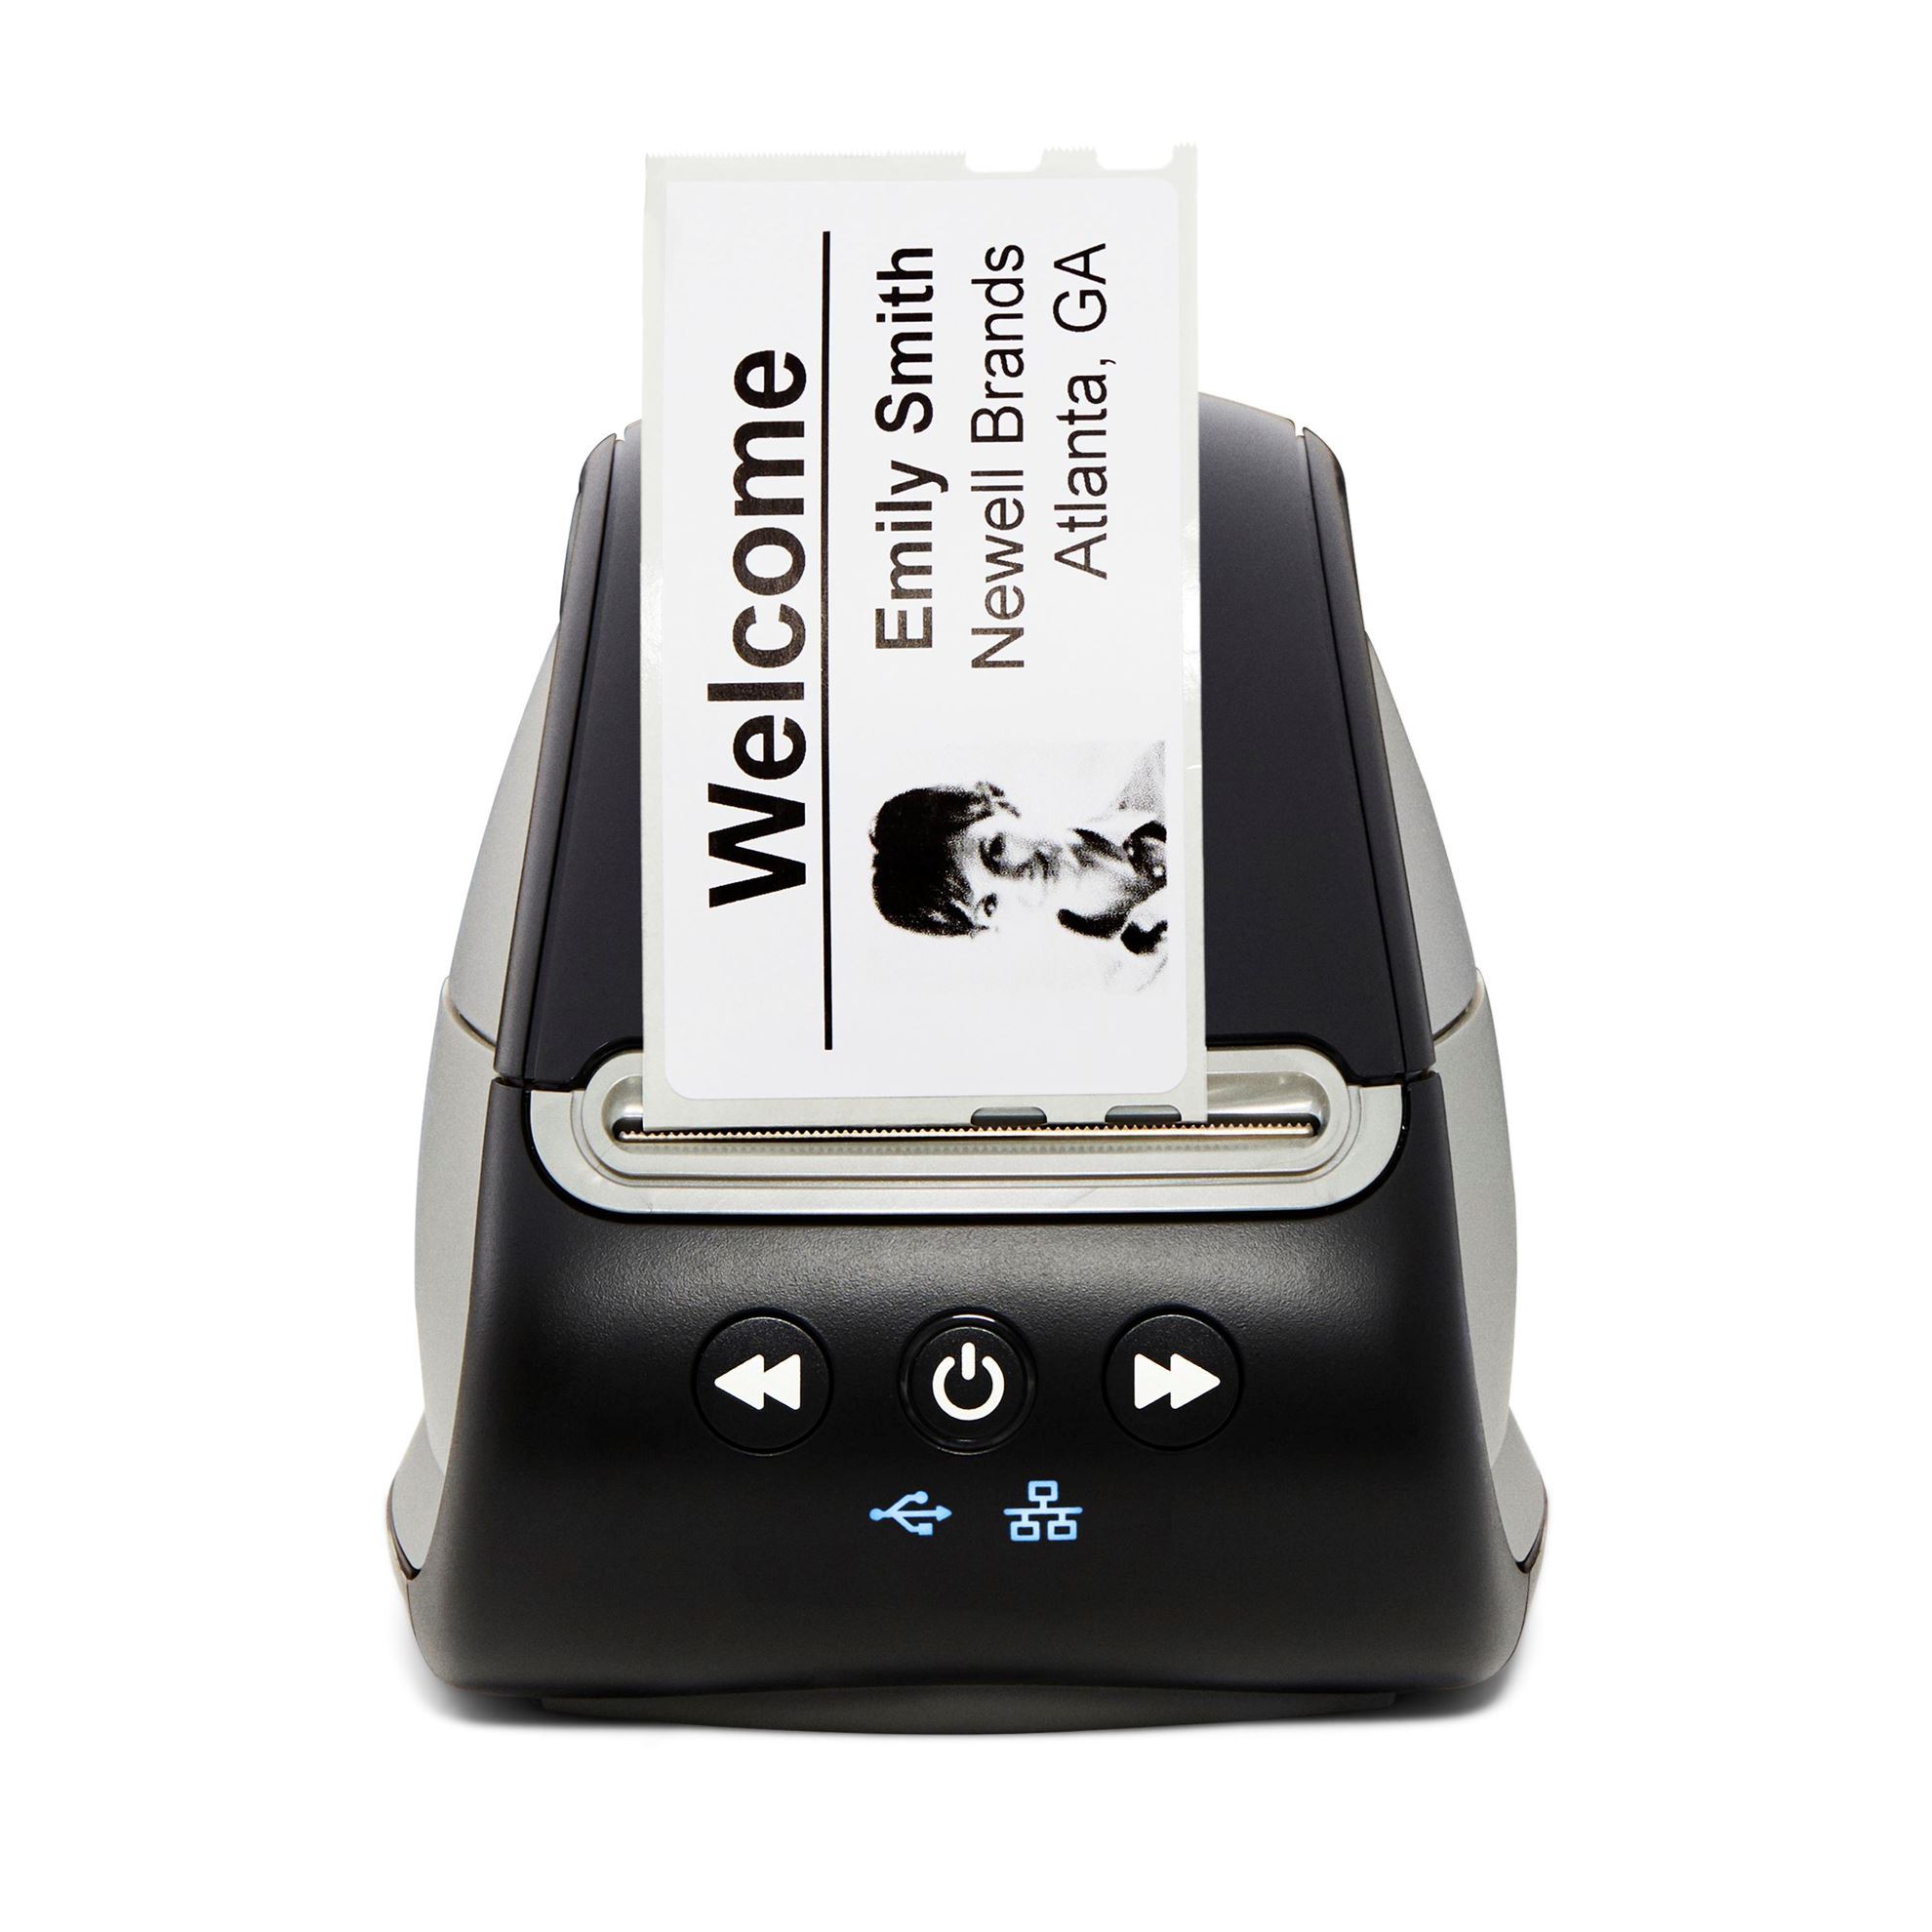 DYMO LabelWriter 550 Turbo USB Direct Thermal Label Printer, USB and LAN  Connectivity up to 90 Labels Per Minute, 300 dpi, Auto Label Recognition,  M